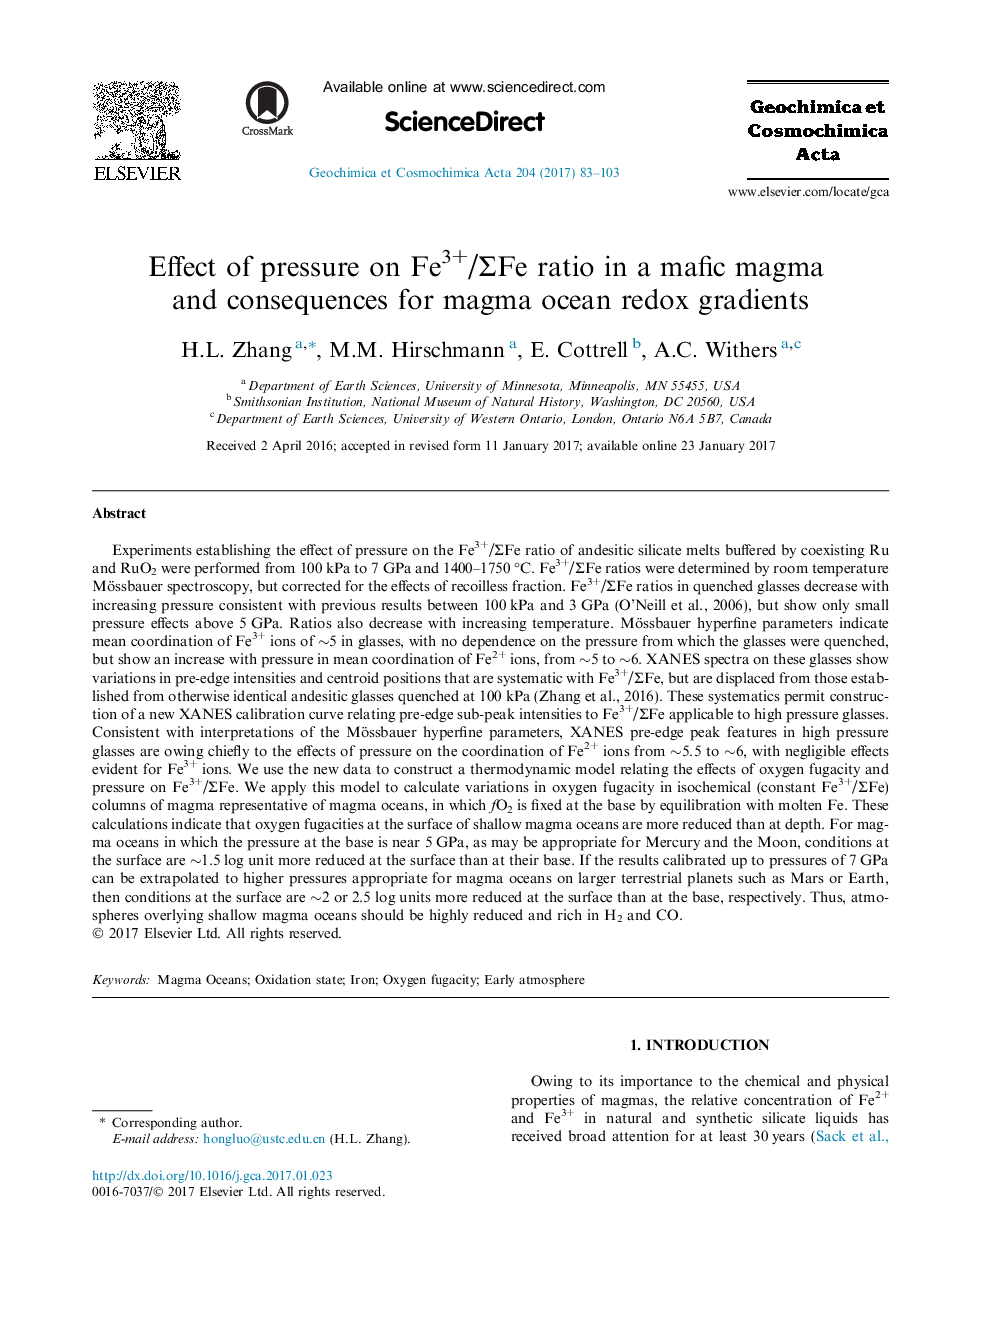 Effect of pressure on Fe3+/Î£Fe ratio in a mafic magma and consequences for magma ocean redox gradients